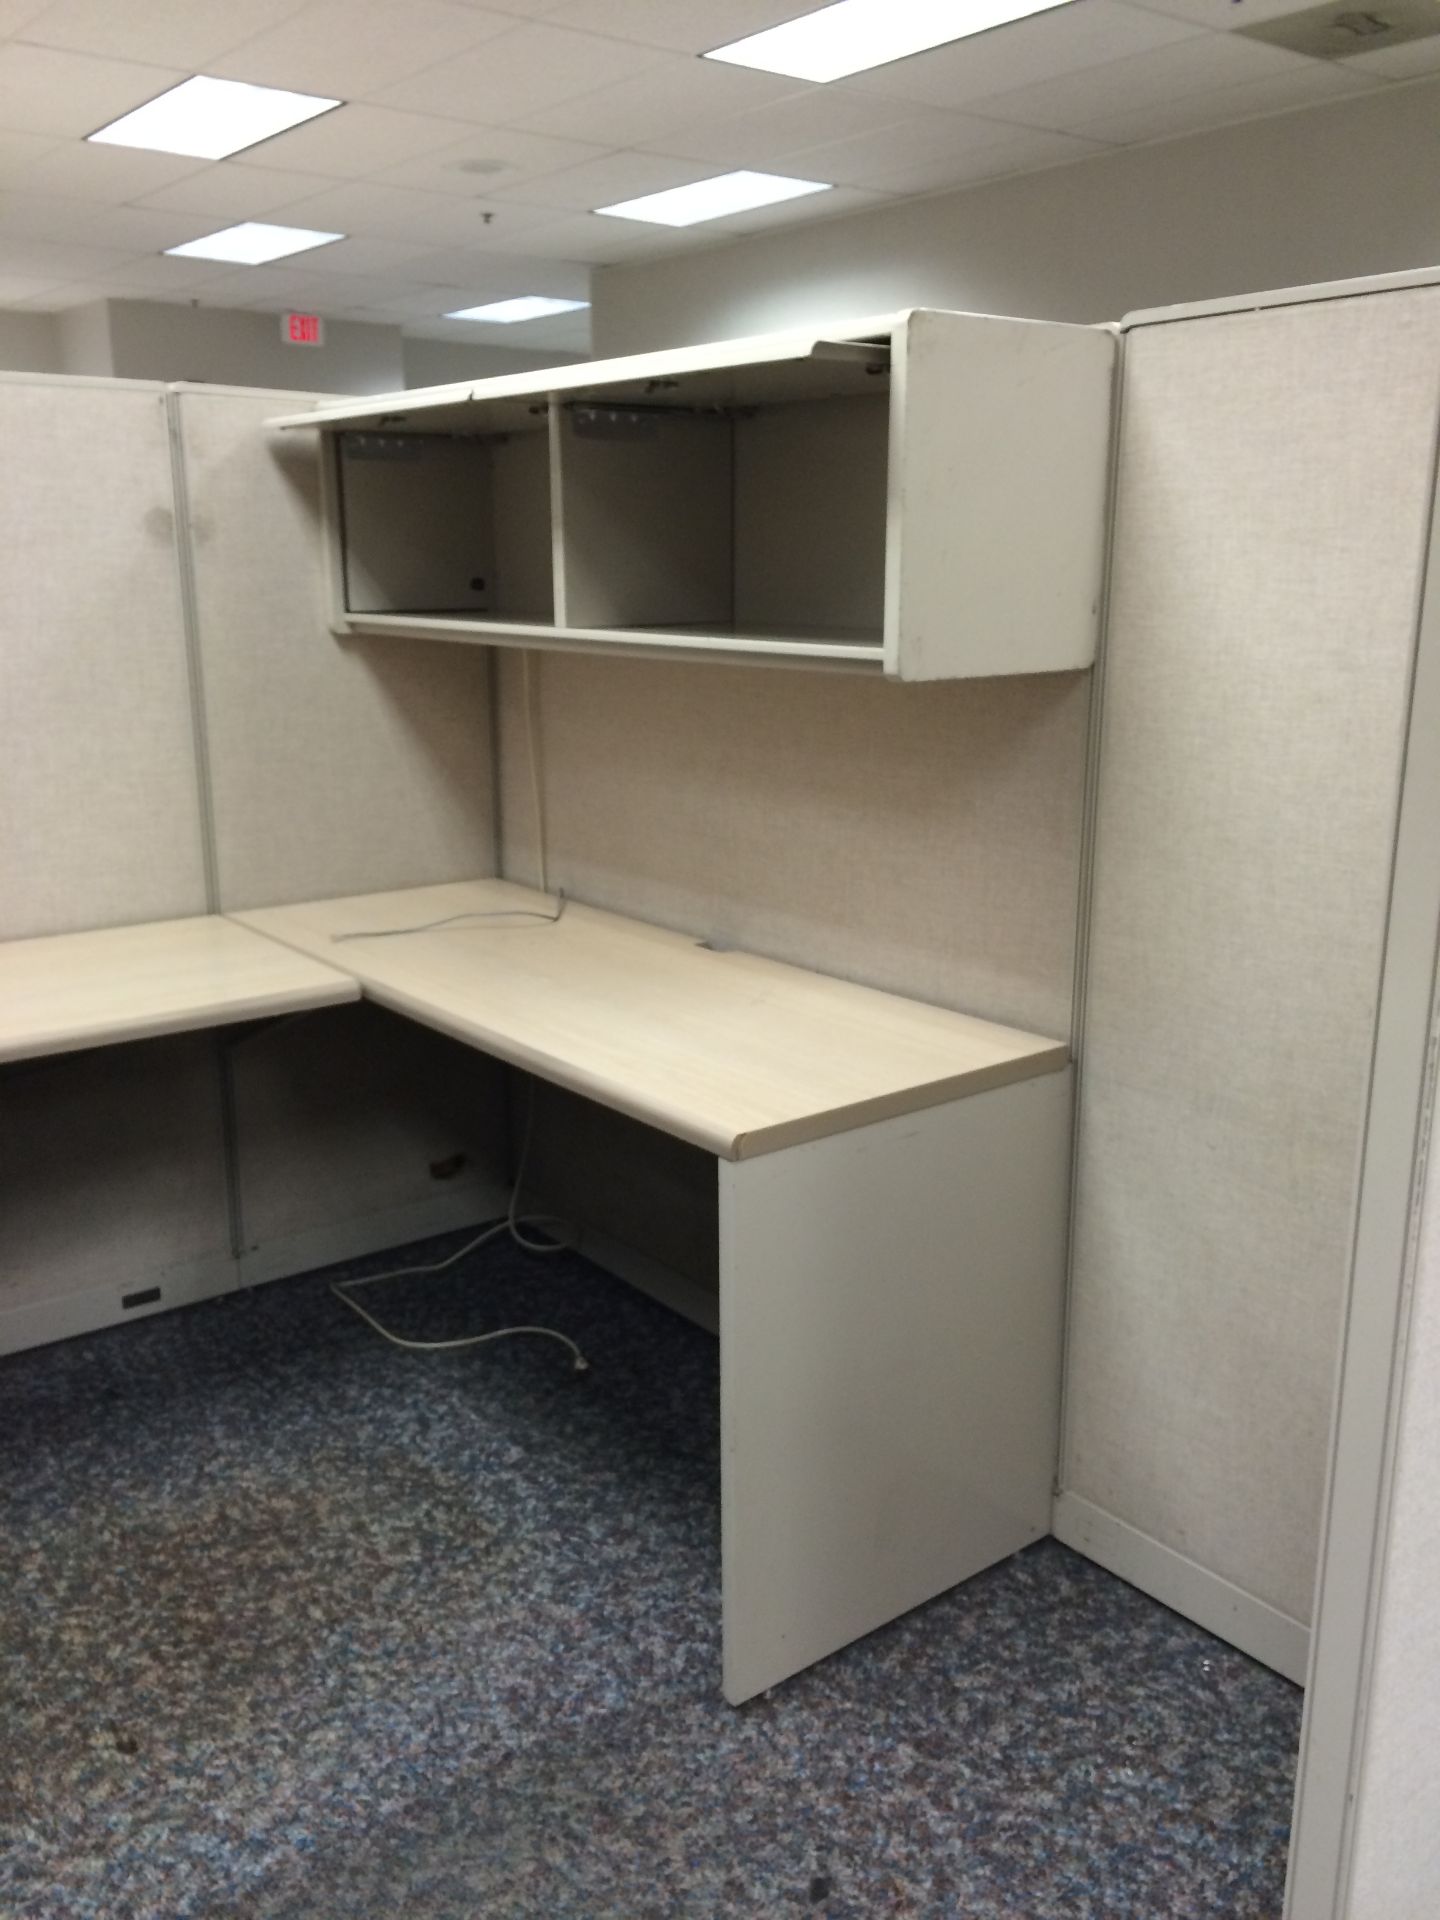 LOT OF 5 OFFICE CUBICLE SYSTEM (CHECK DRAWING AND PICTURES FOR MORE DETAILS) - Image 4 of 4